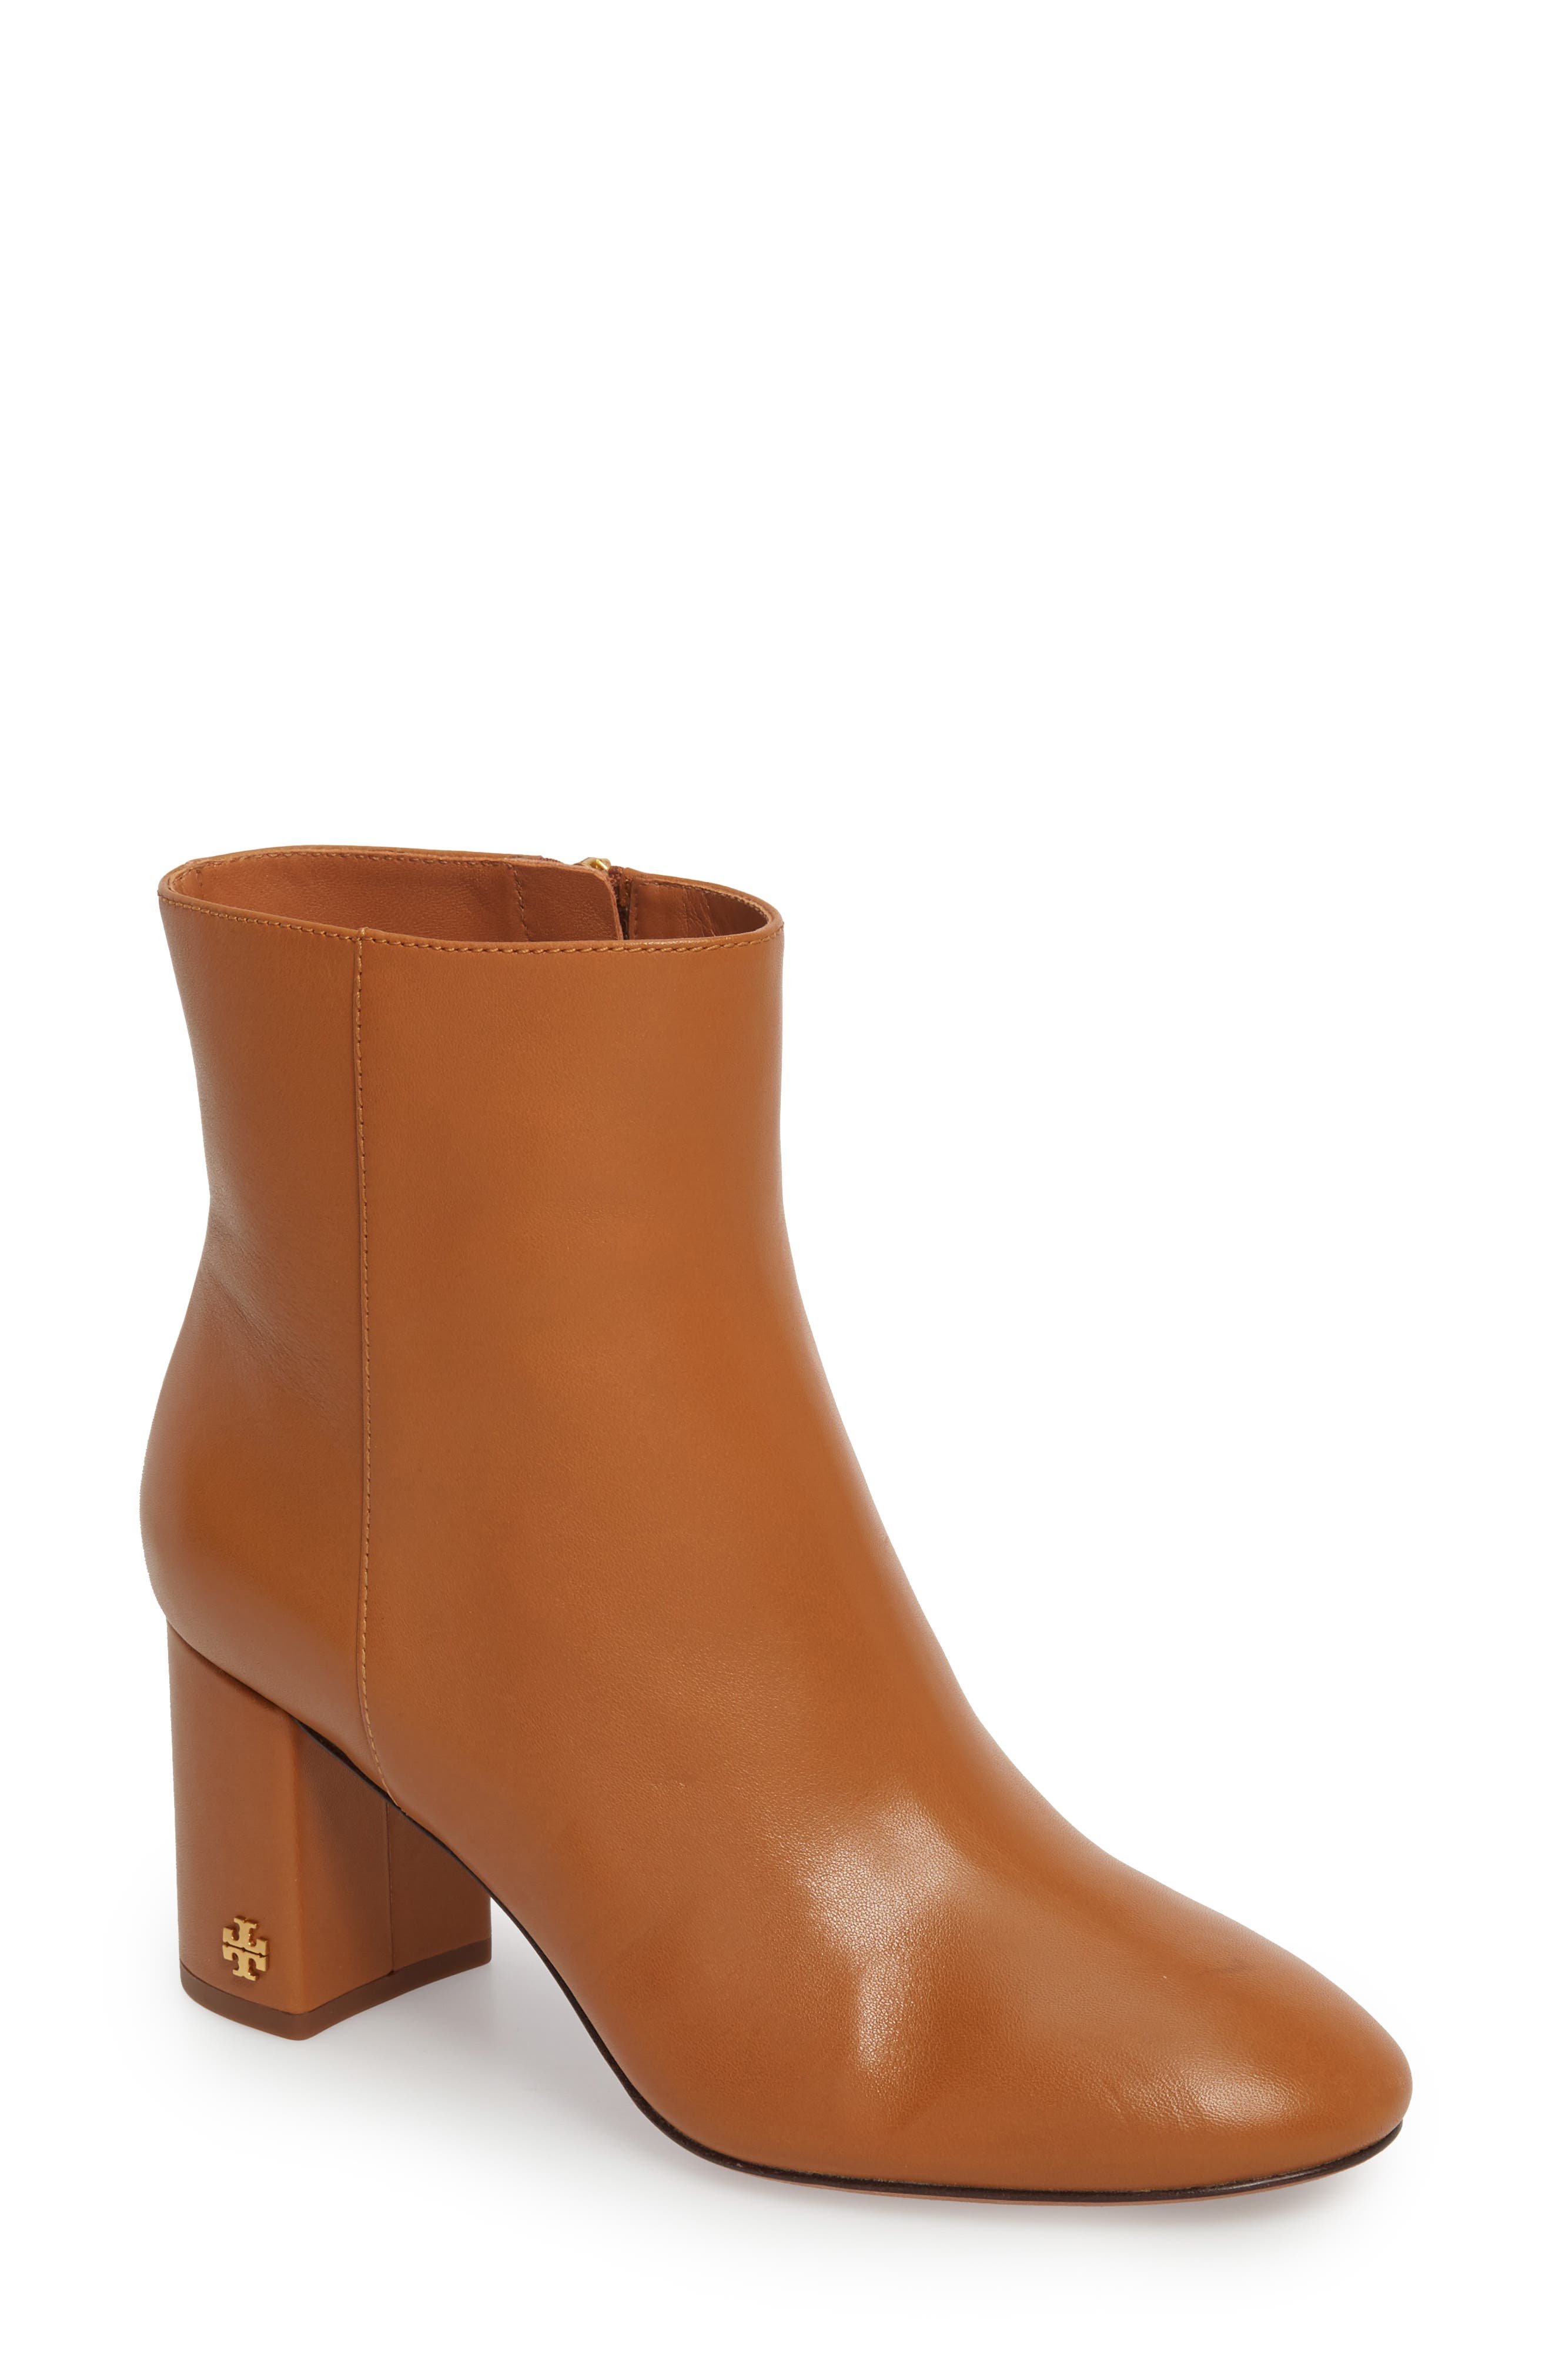 tory burch brooke ankle bootie